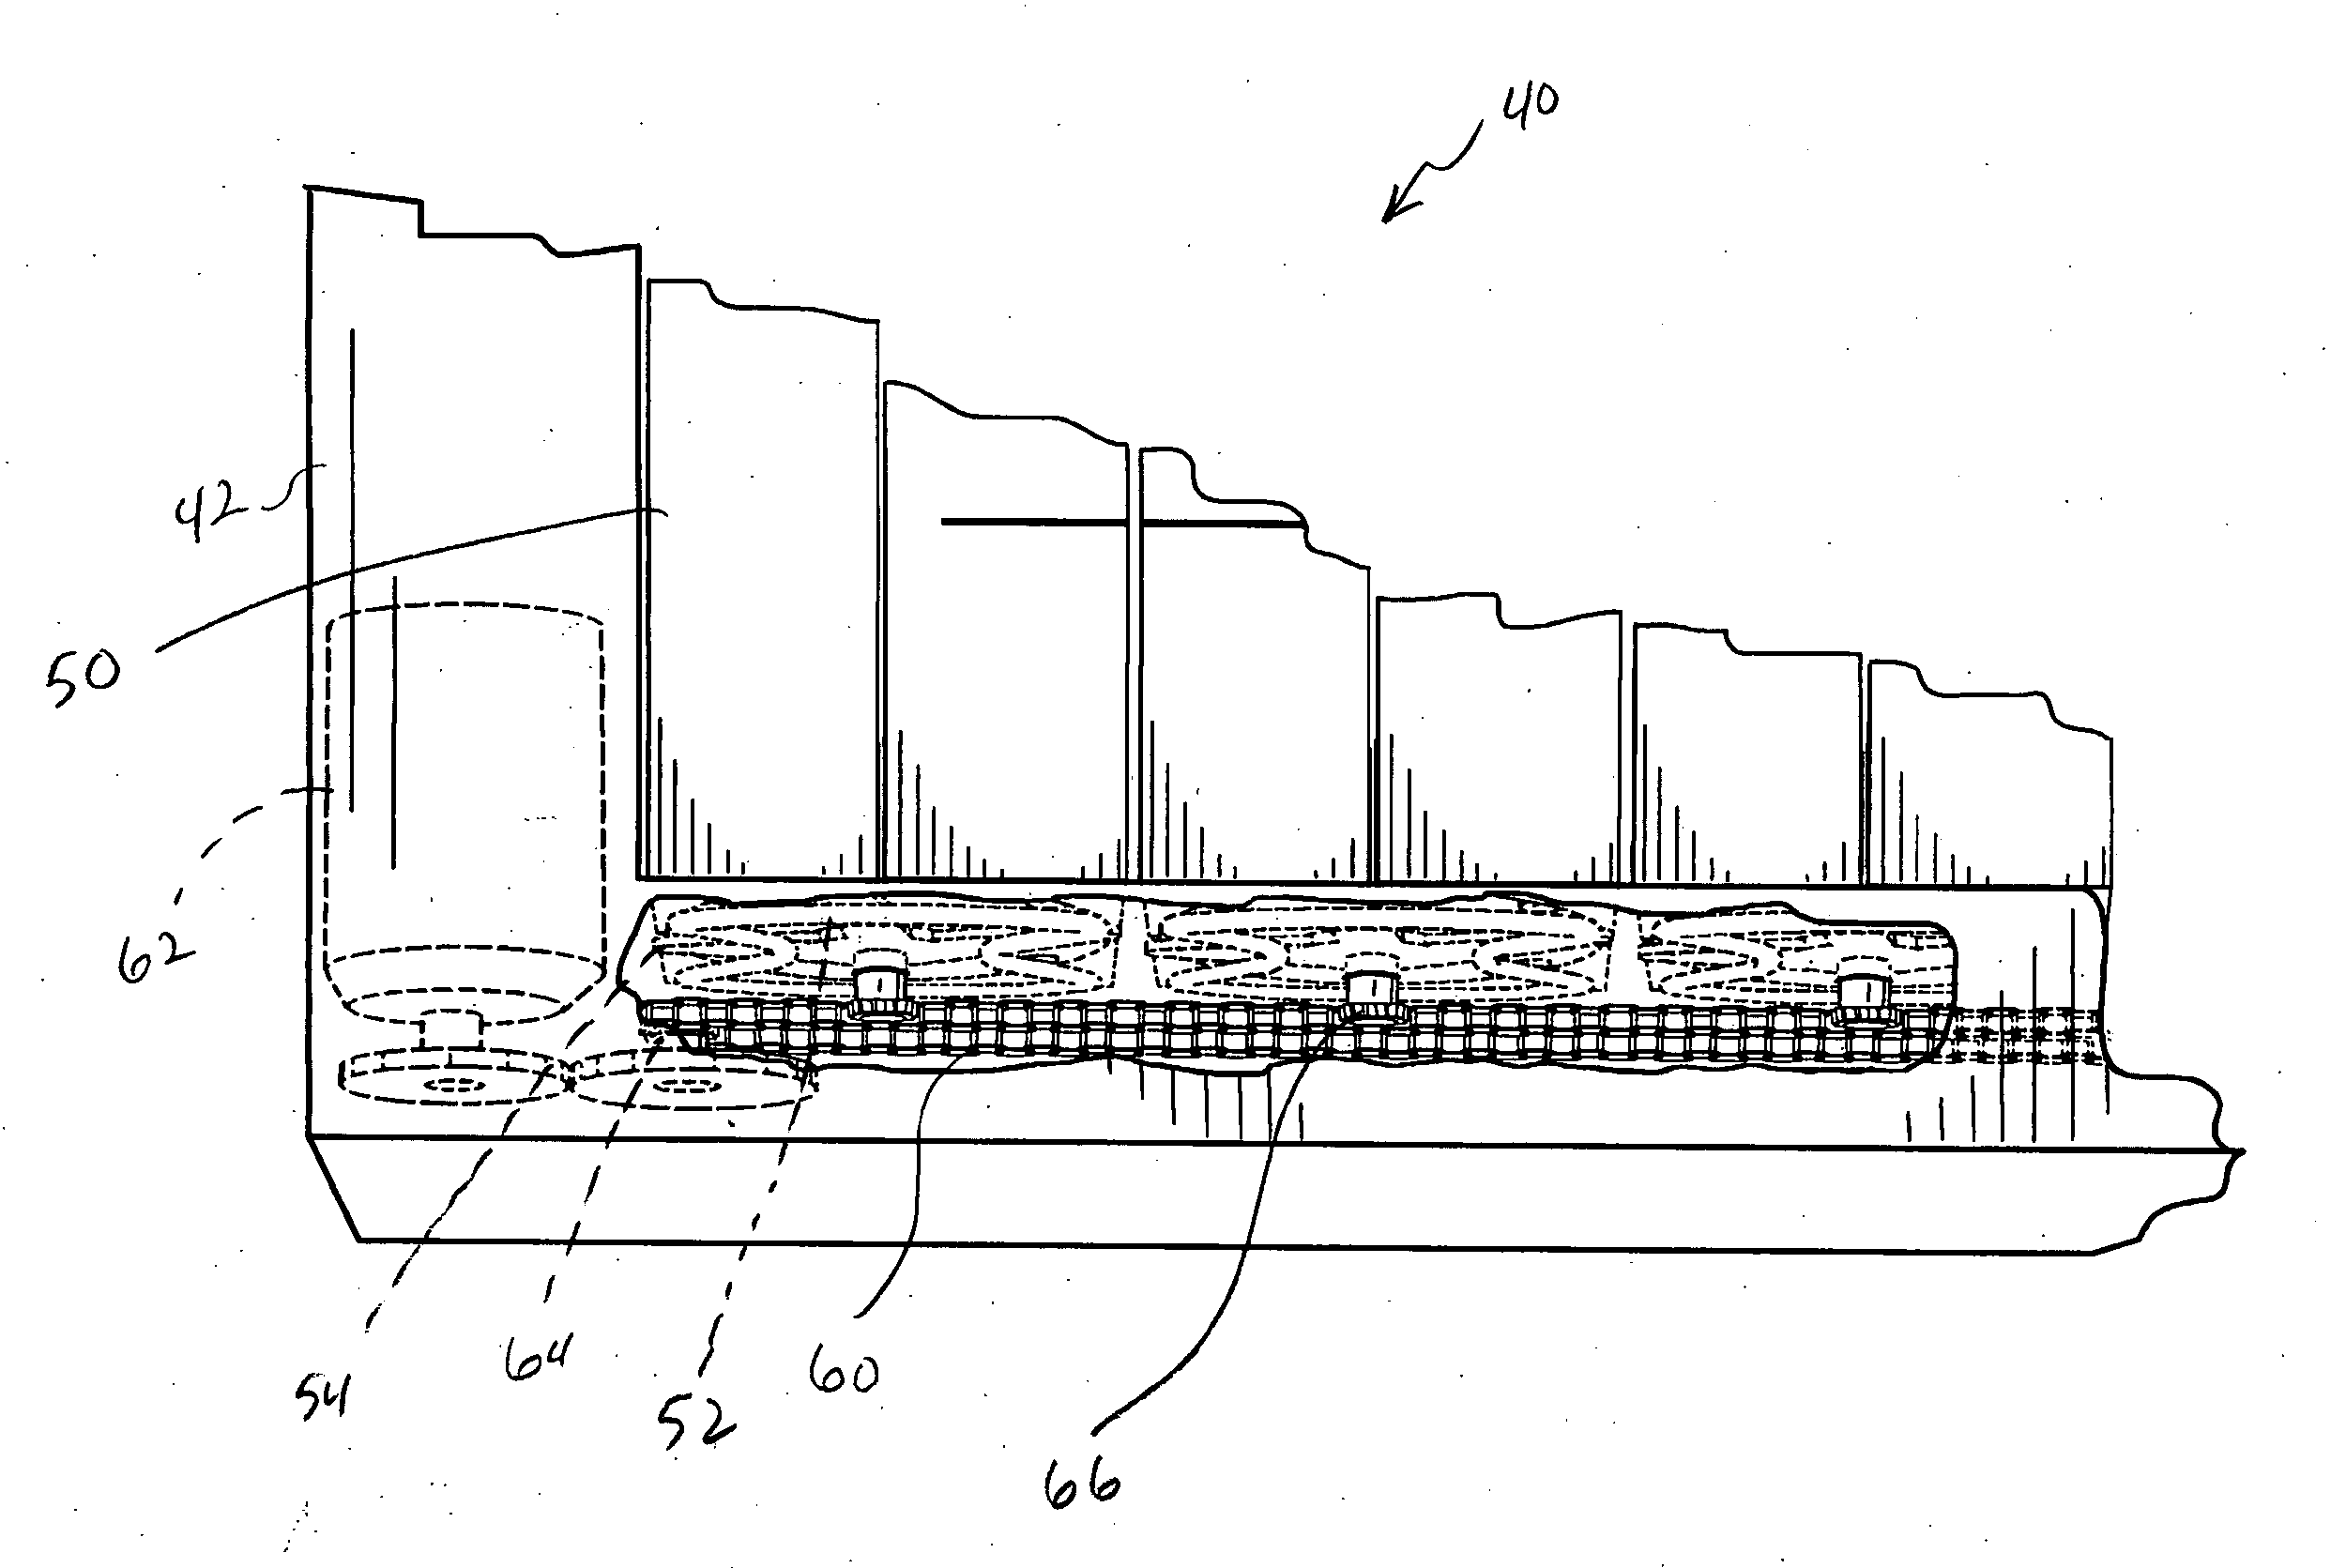 Display system having a magnetic drive assembly and associated methods